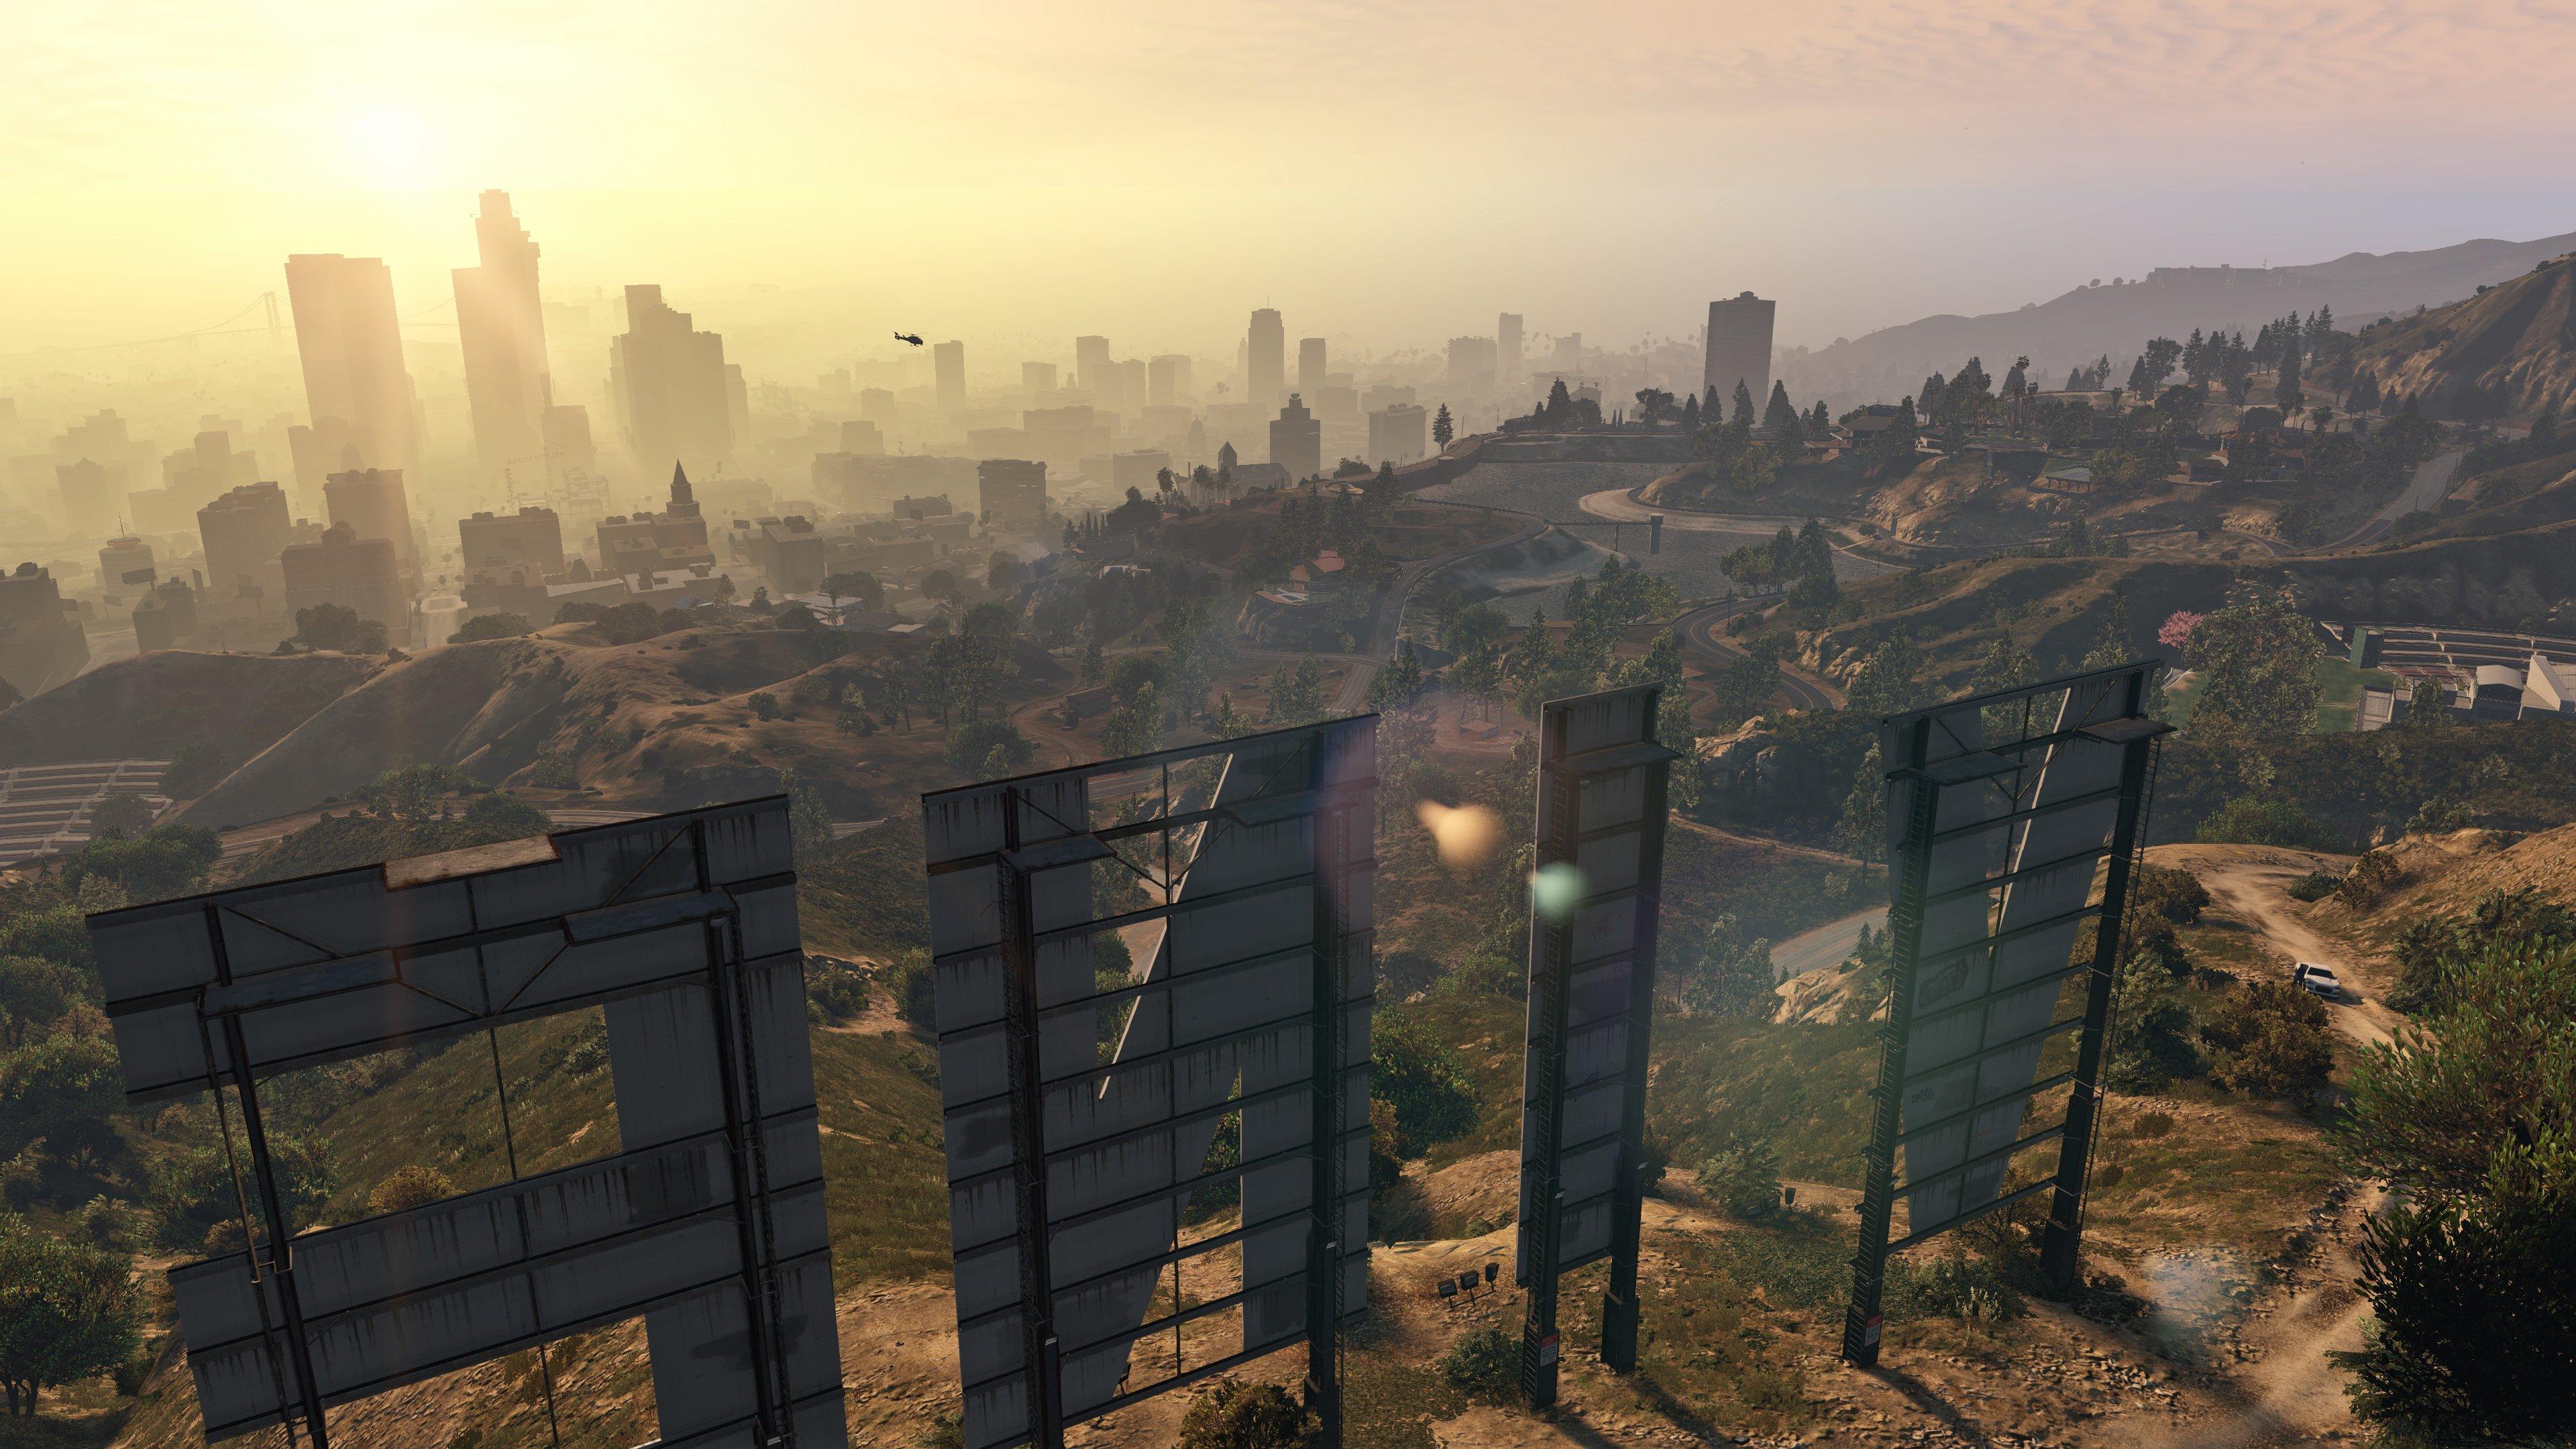 Building the Best PC for Grand Theft Auto V